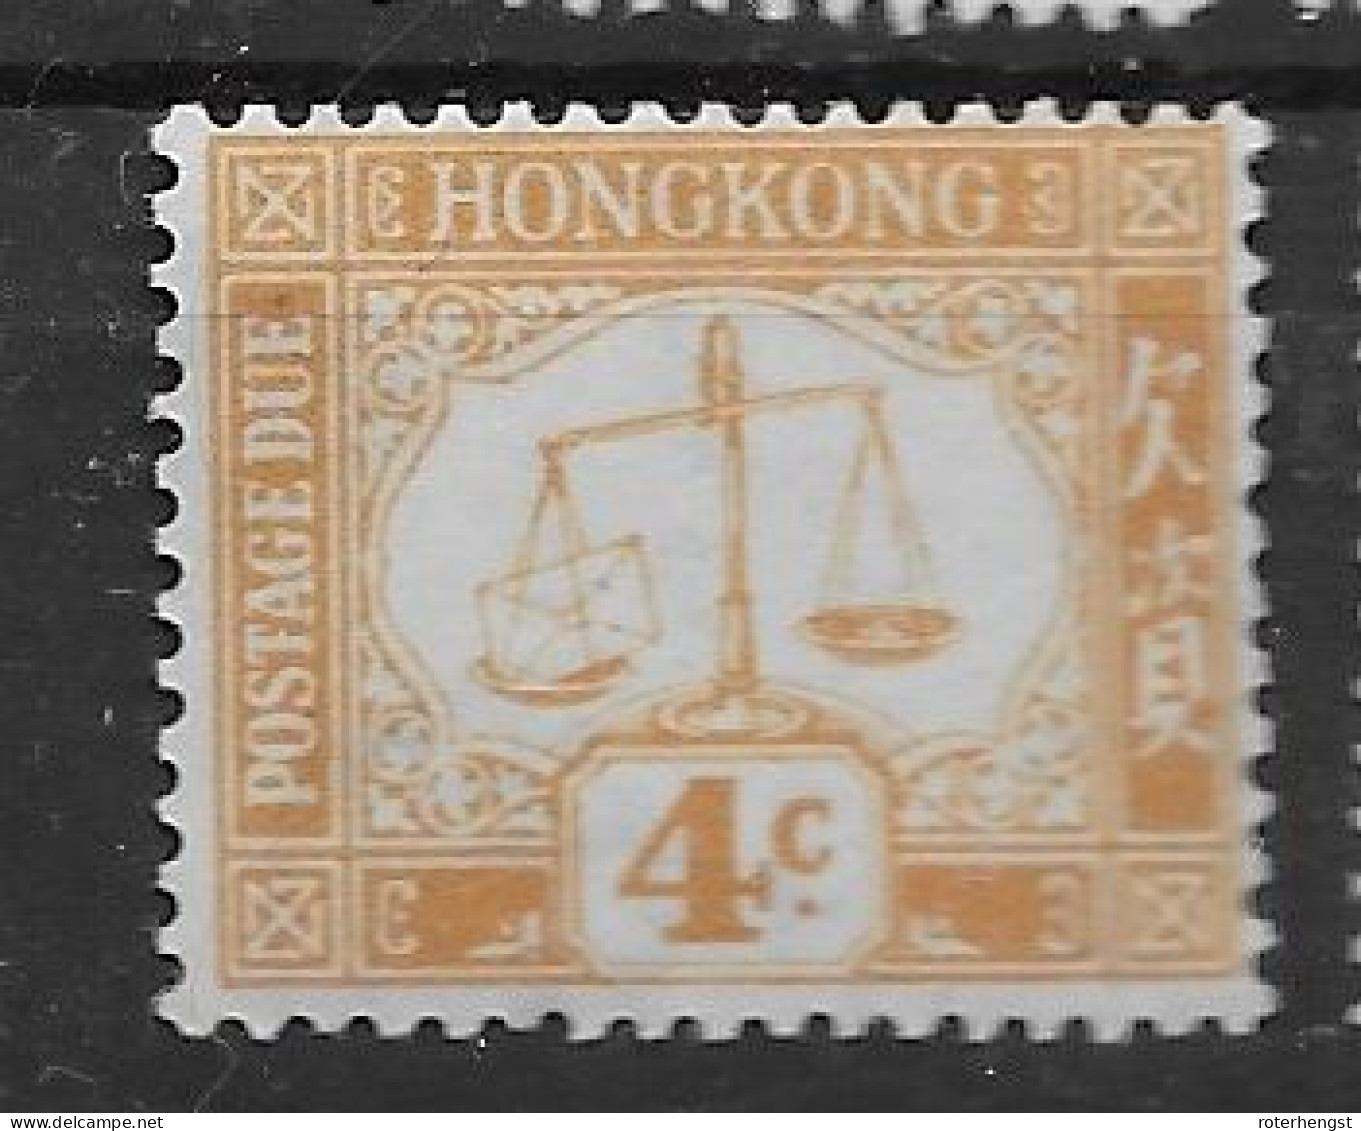 Hong Kong Mint Low Hinge Trace 1938 Normal Paper 25 Euros - Timbres-taxe